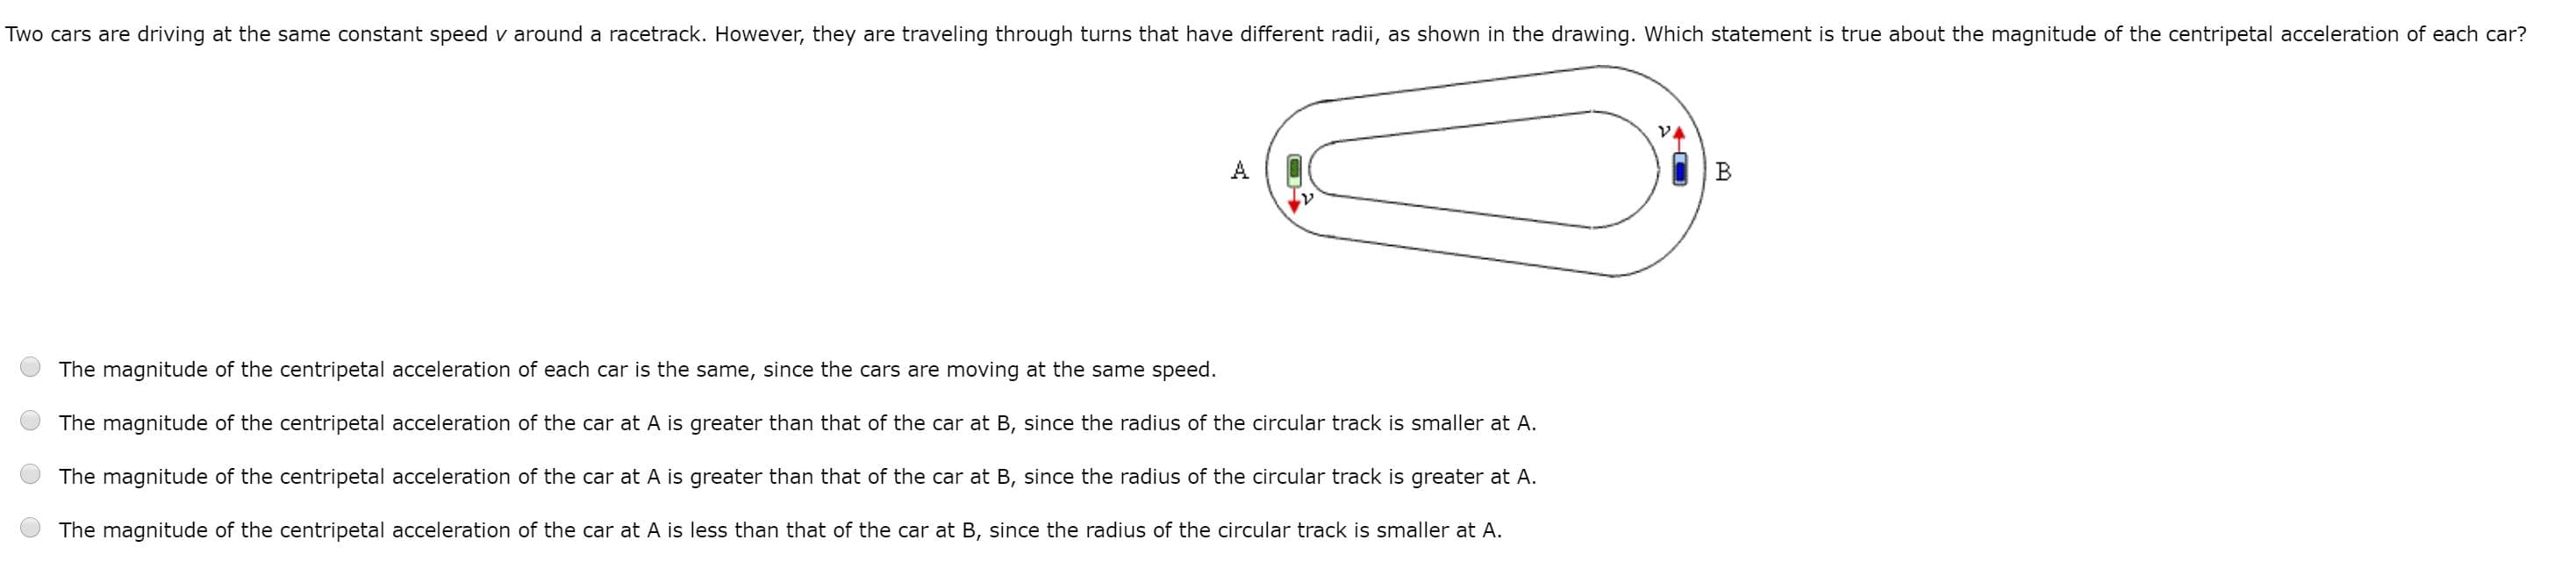 Two cars are driving at the same constant speed v around a racetrack. However, they are traveling through turns that have different radii, as shown in the drawing. Which statement is true about the magnitude of the centripetal acceleration of each car?
